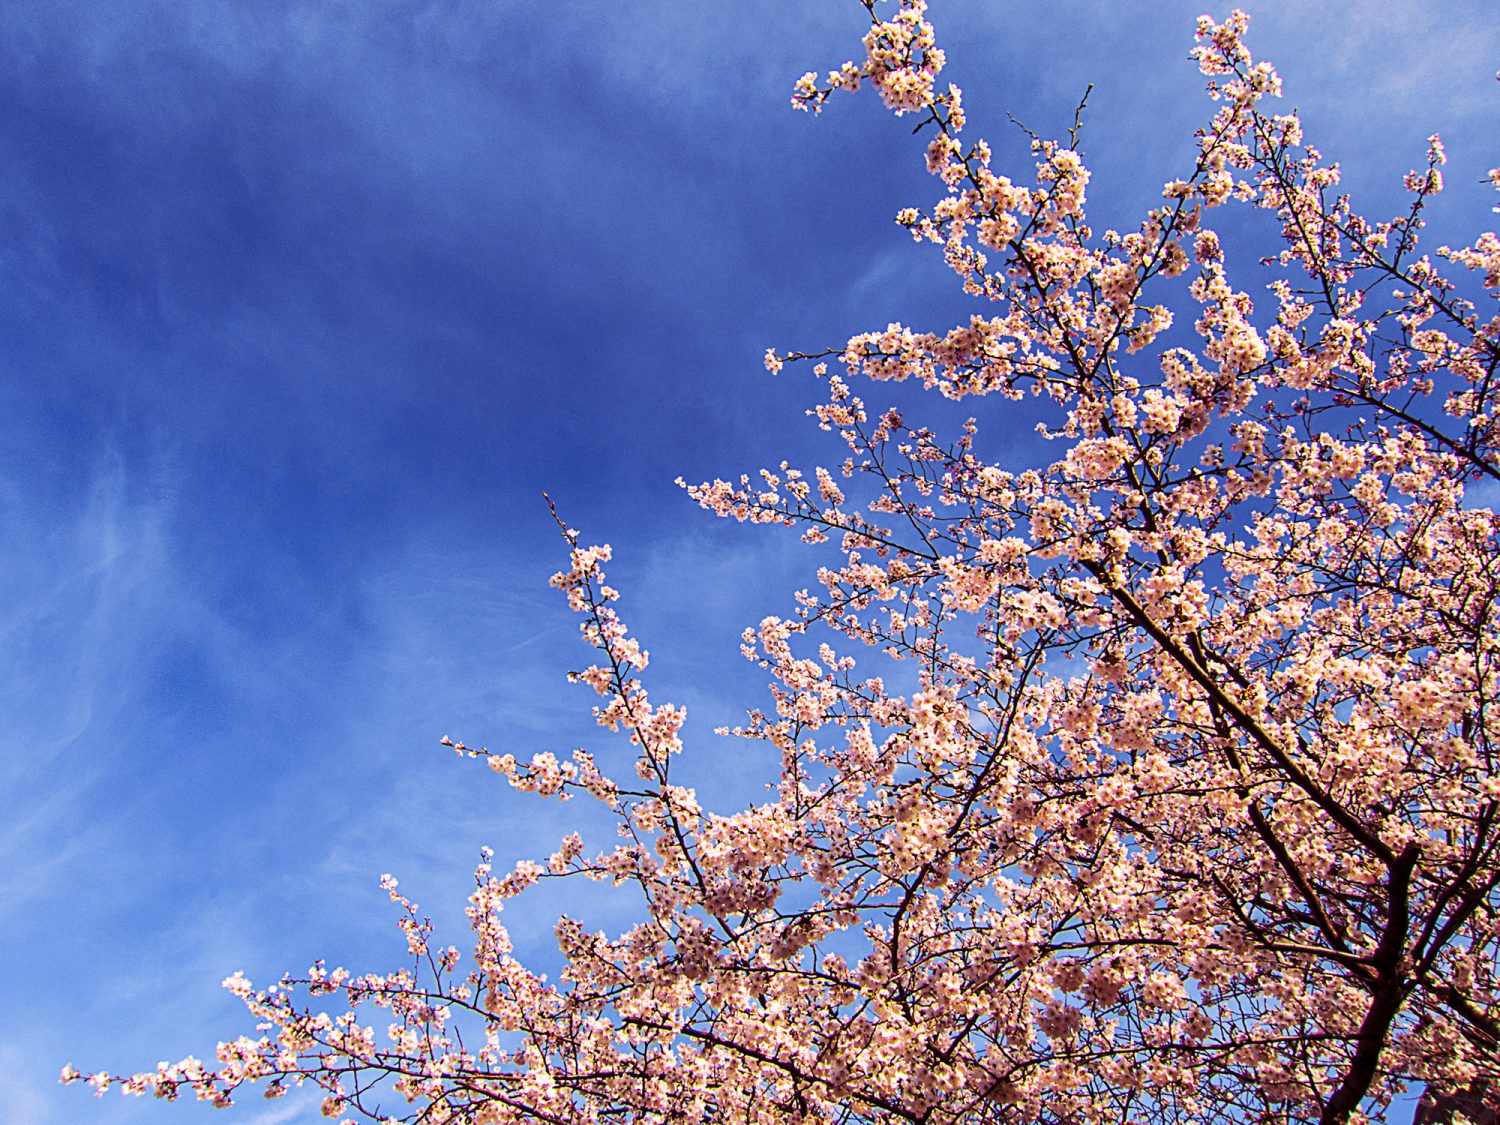 Pink Blooming Flowers against Bright Blue Cloudy Sky